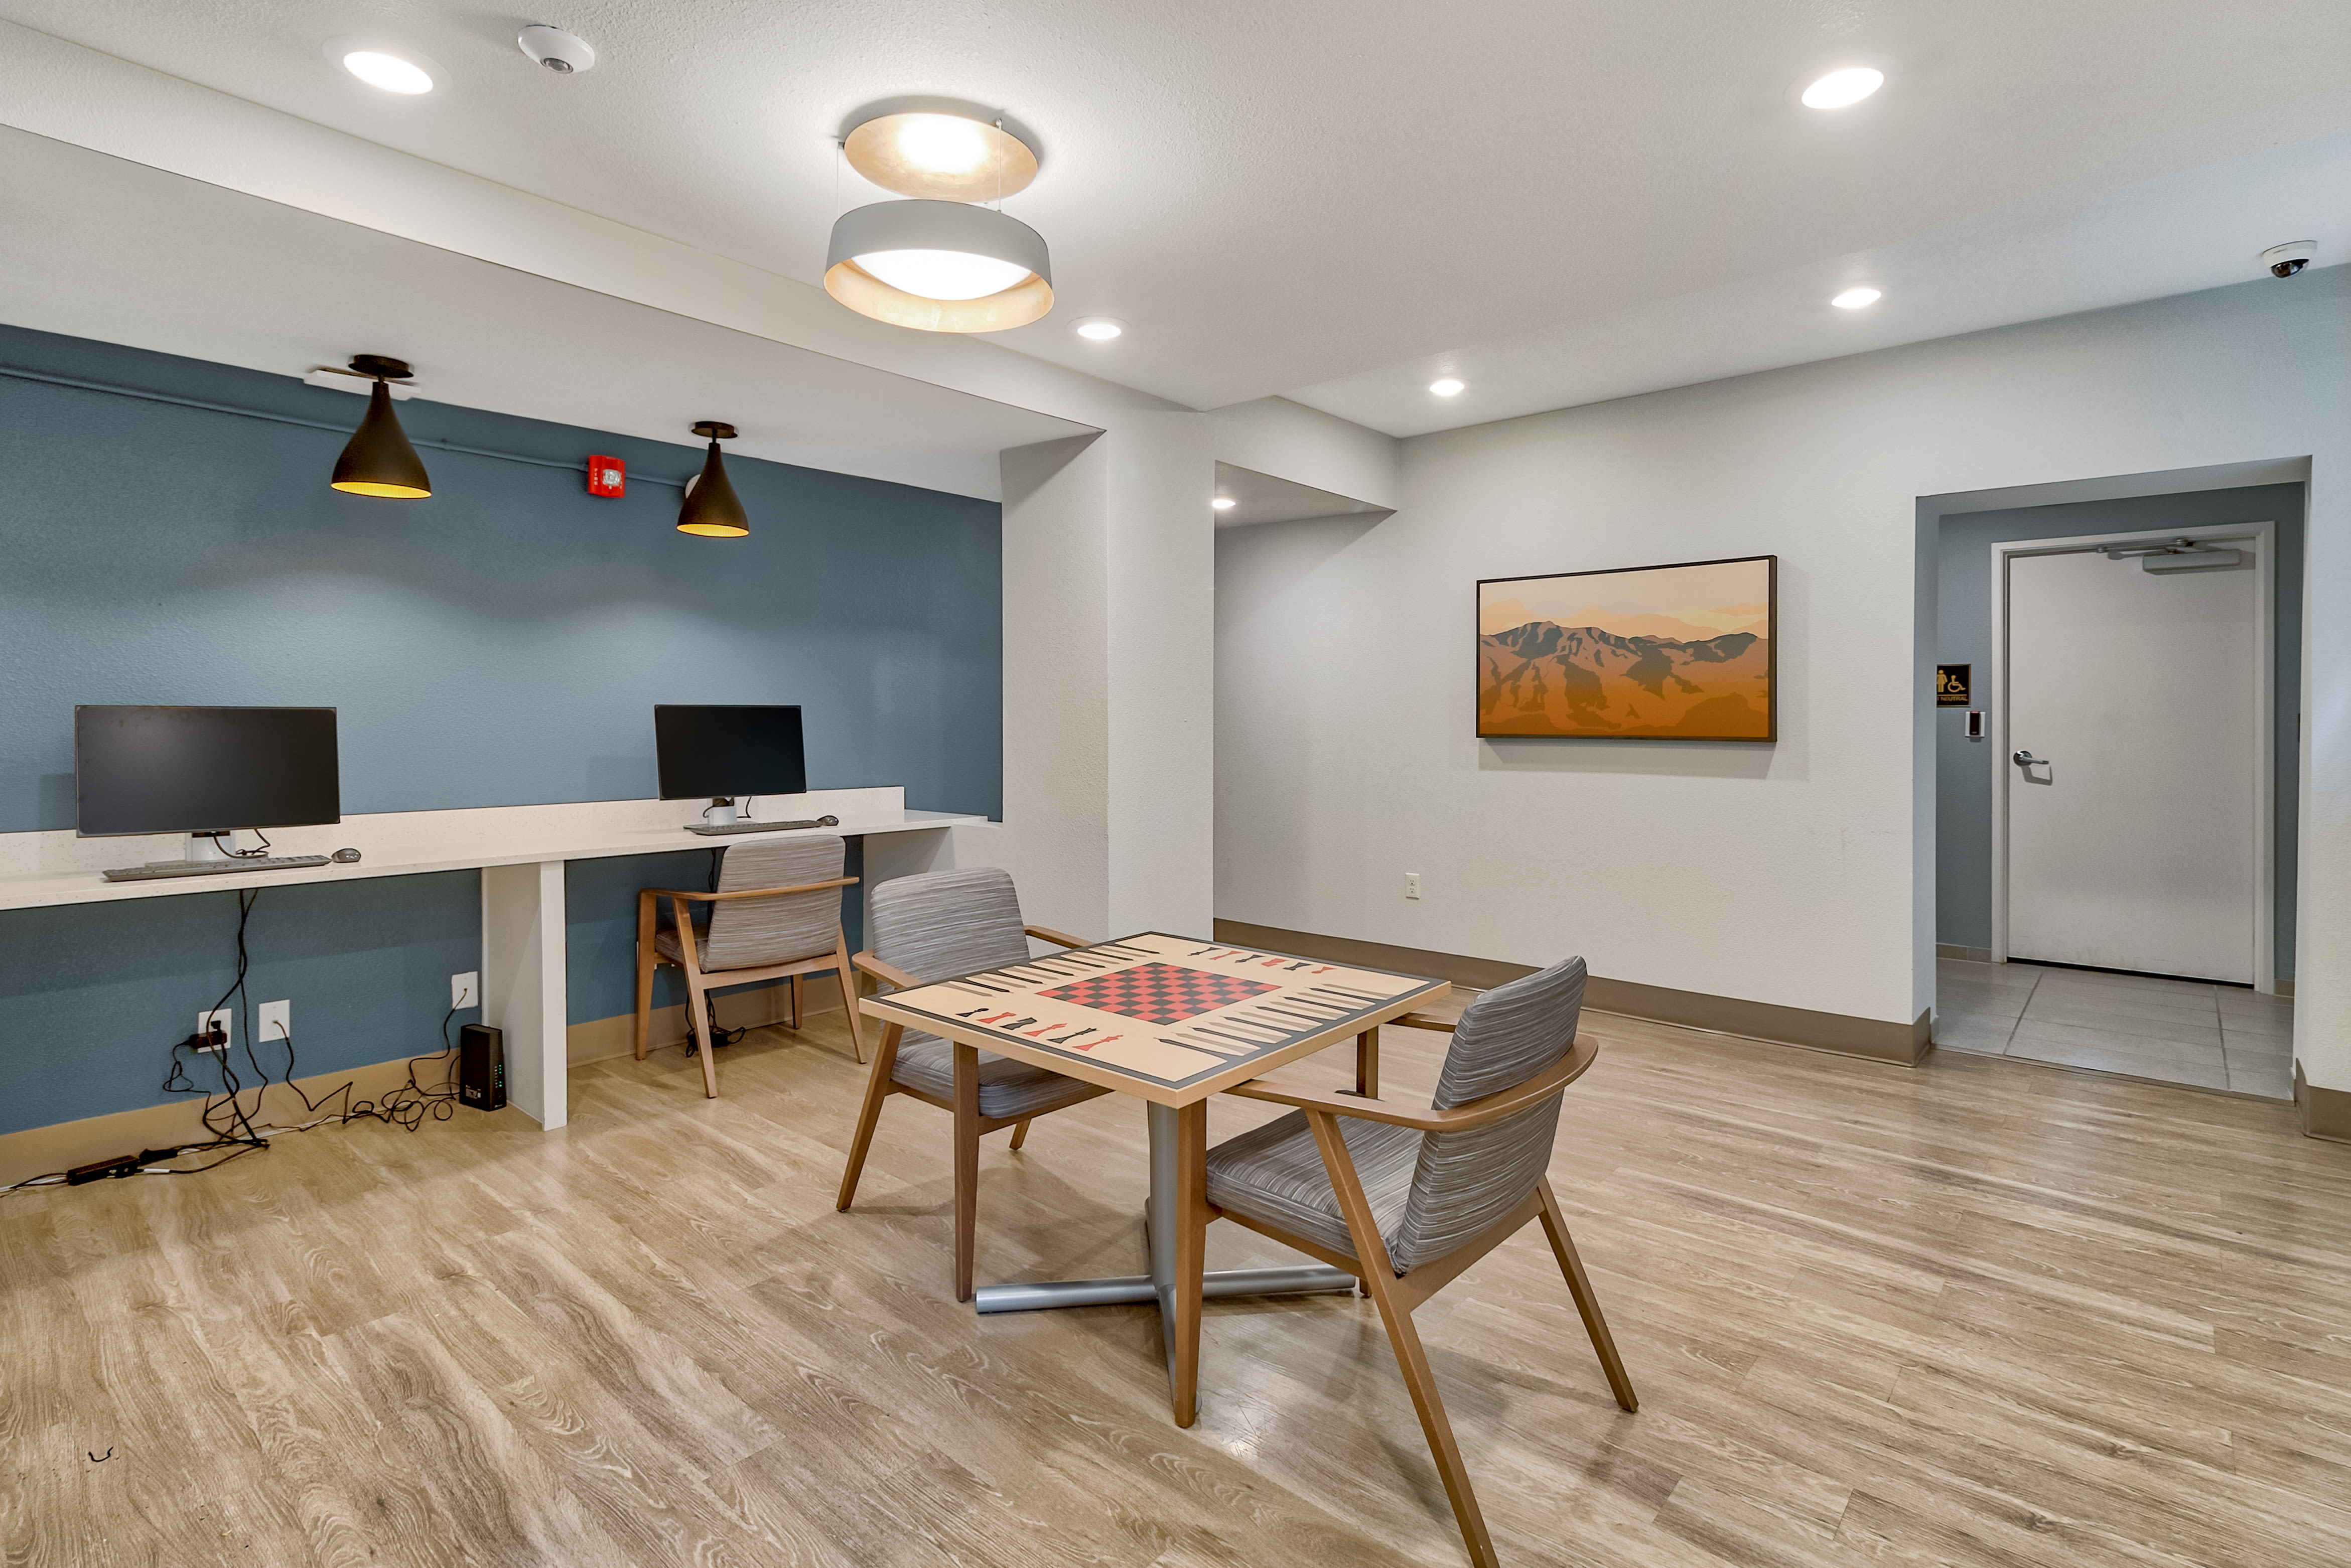 Drehmoor Apartments offers a wide variety of amenities in Denver, Colorado